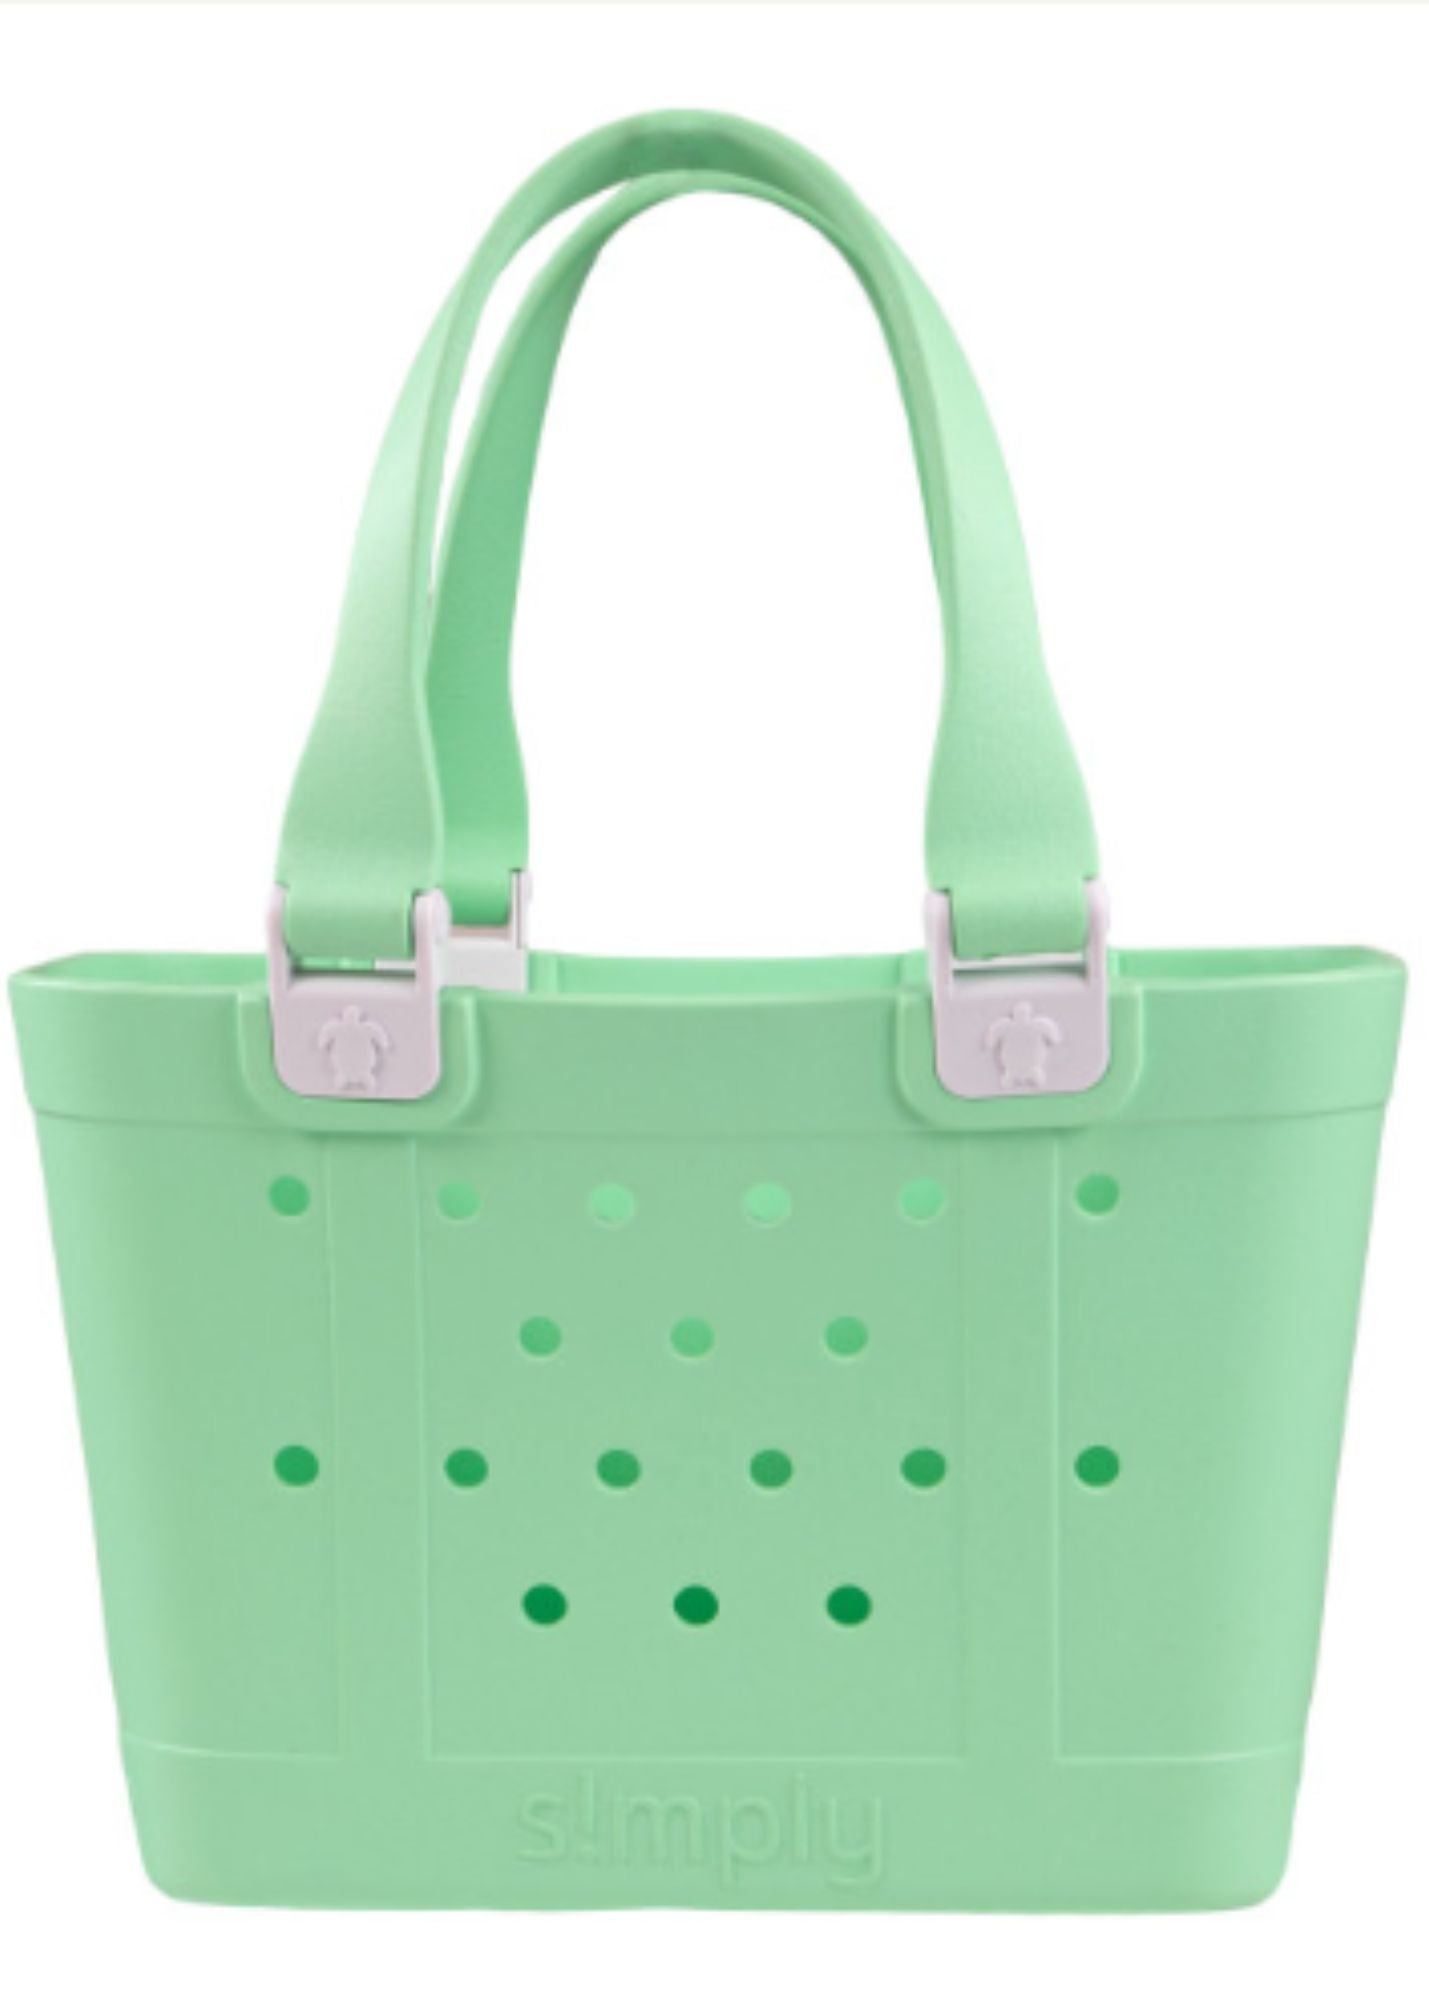 Simply Mini Tote Bag Accessories Lime